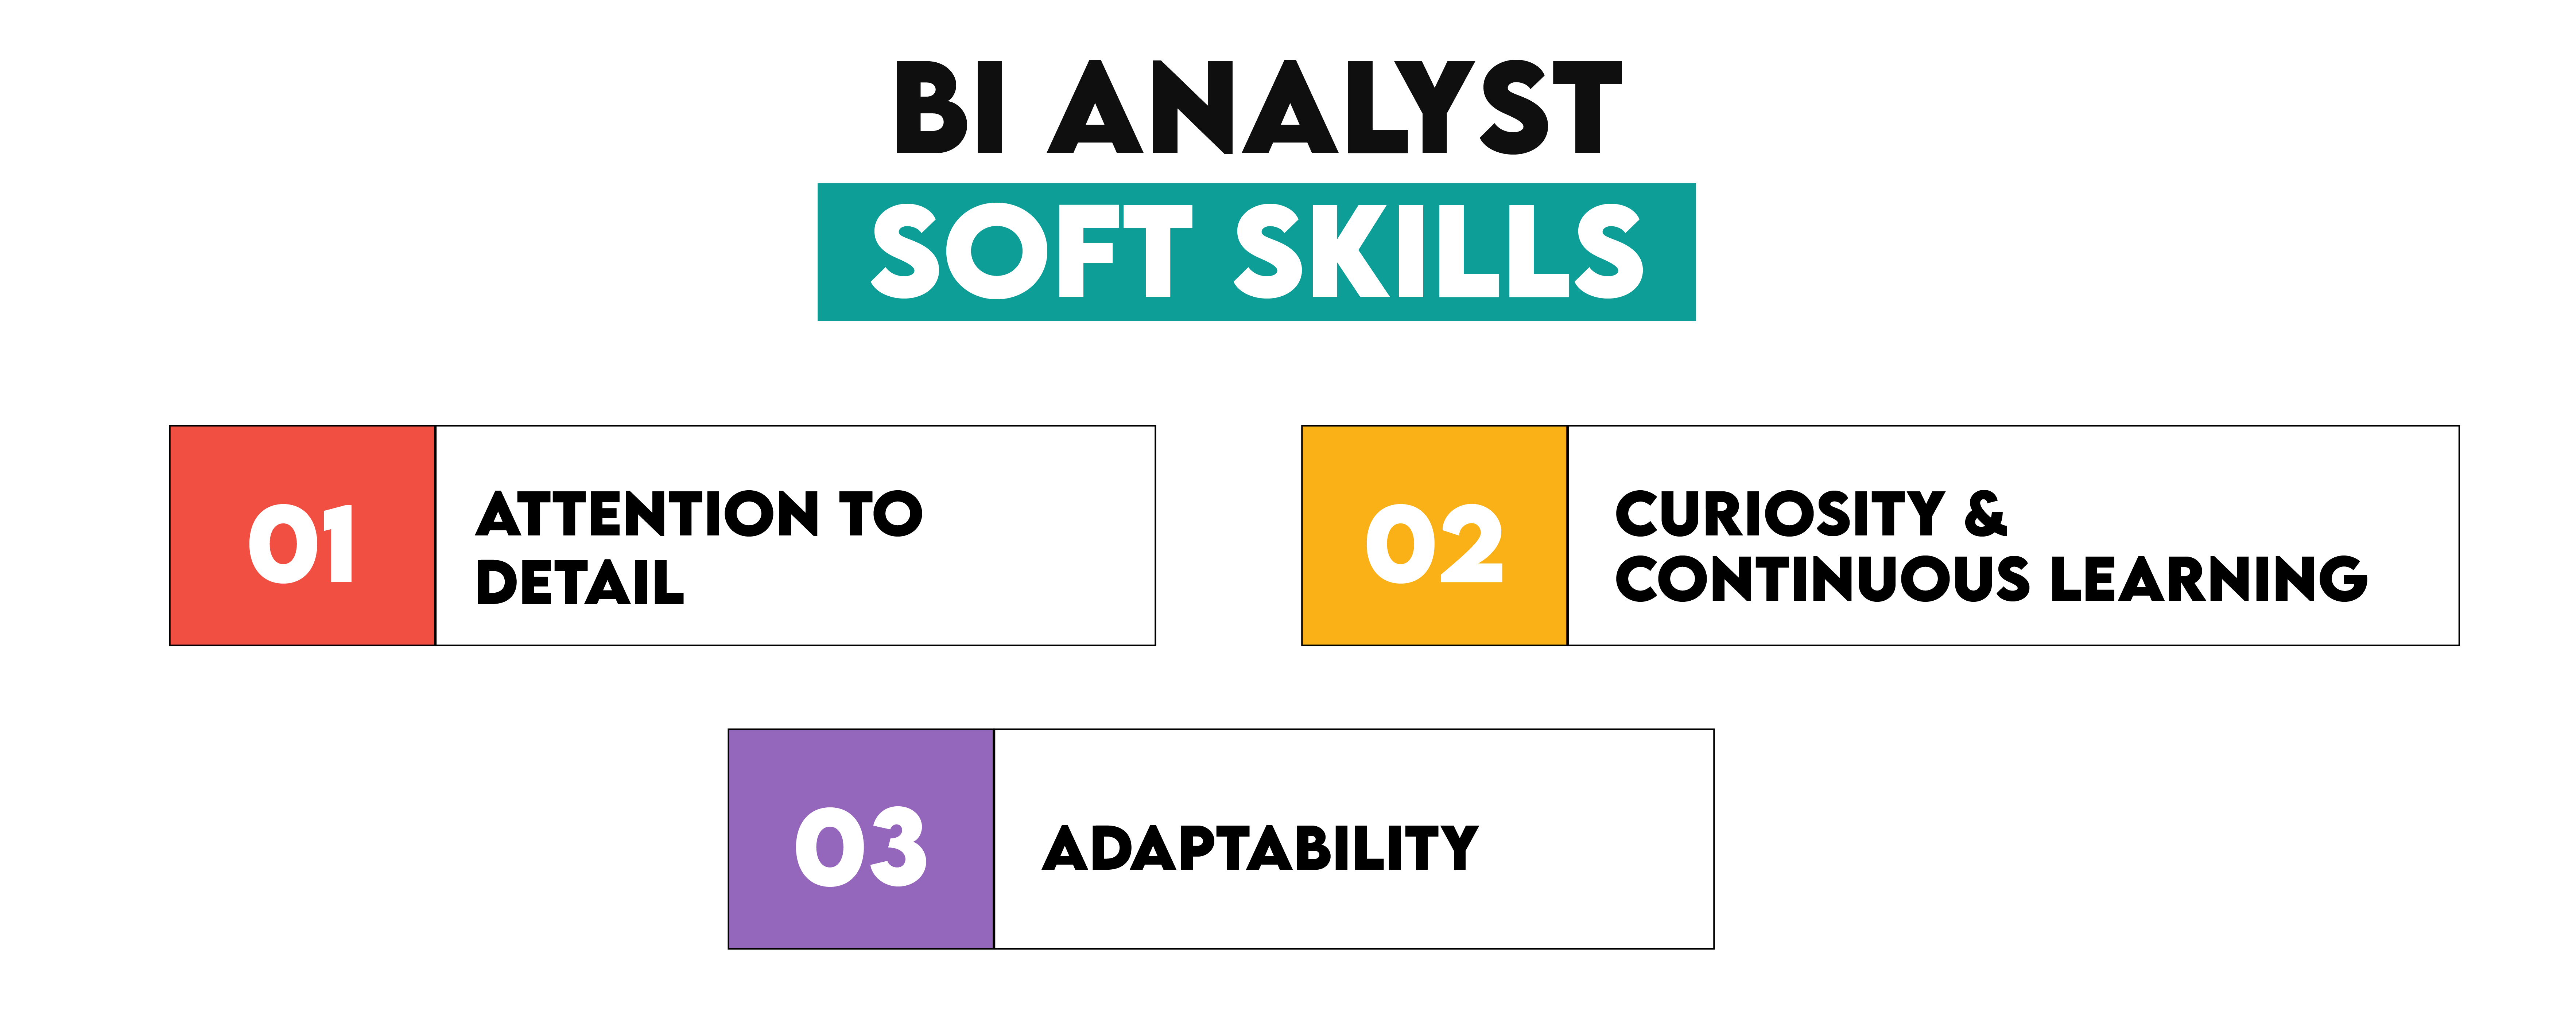 Soft Skills for Business Intelligence Analysts